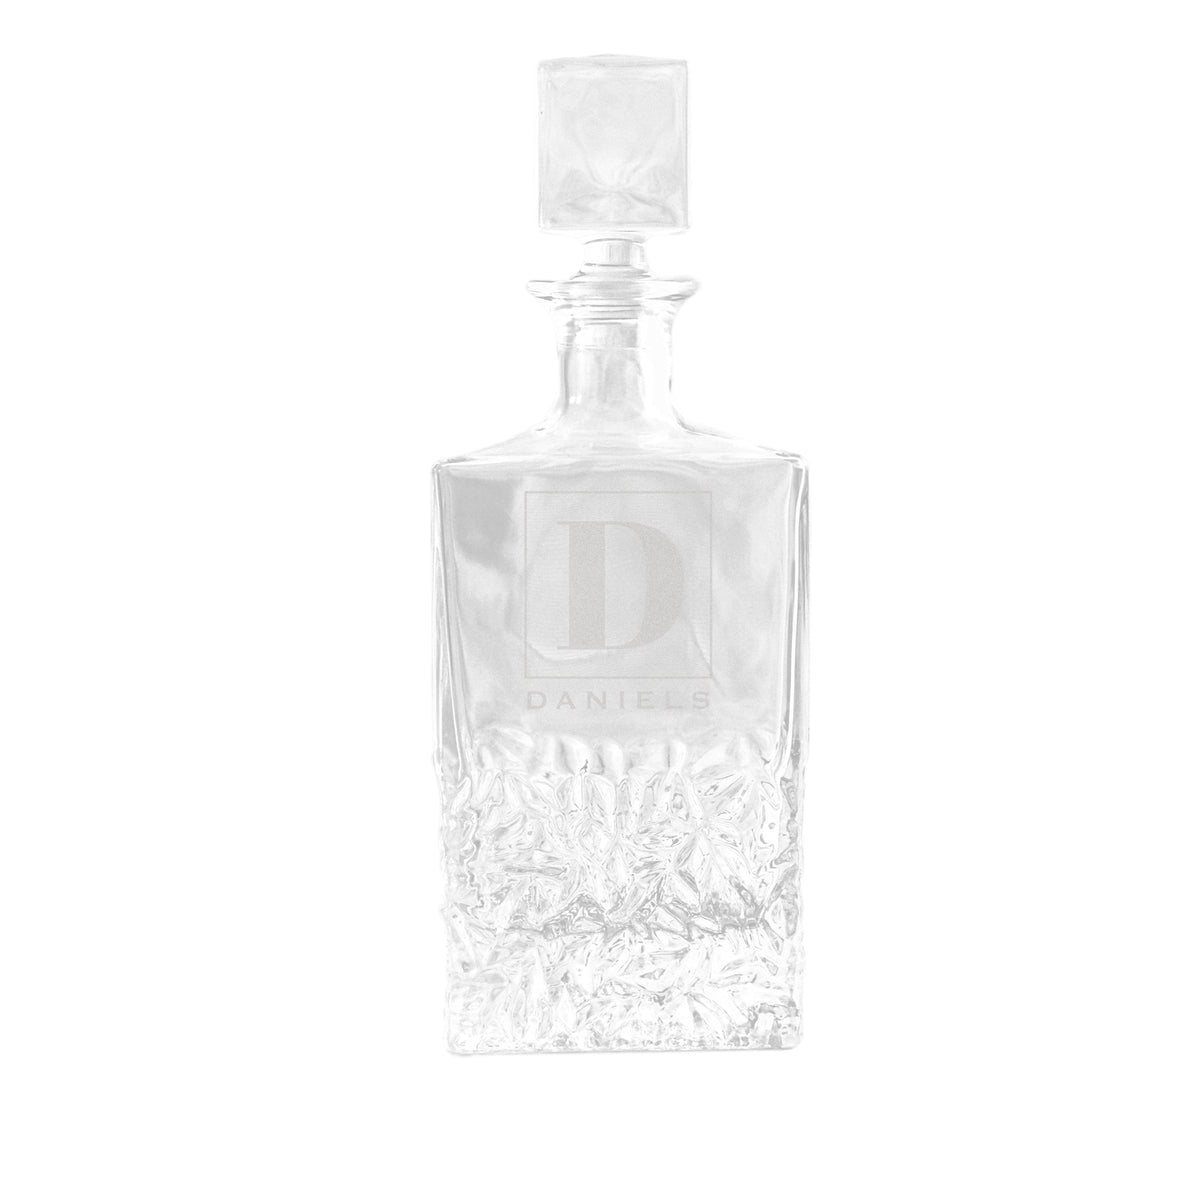 Personalized Initial Wine Decanter, Design: K5 - Everything Etched